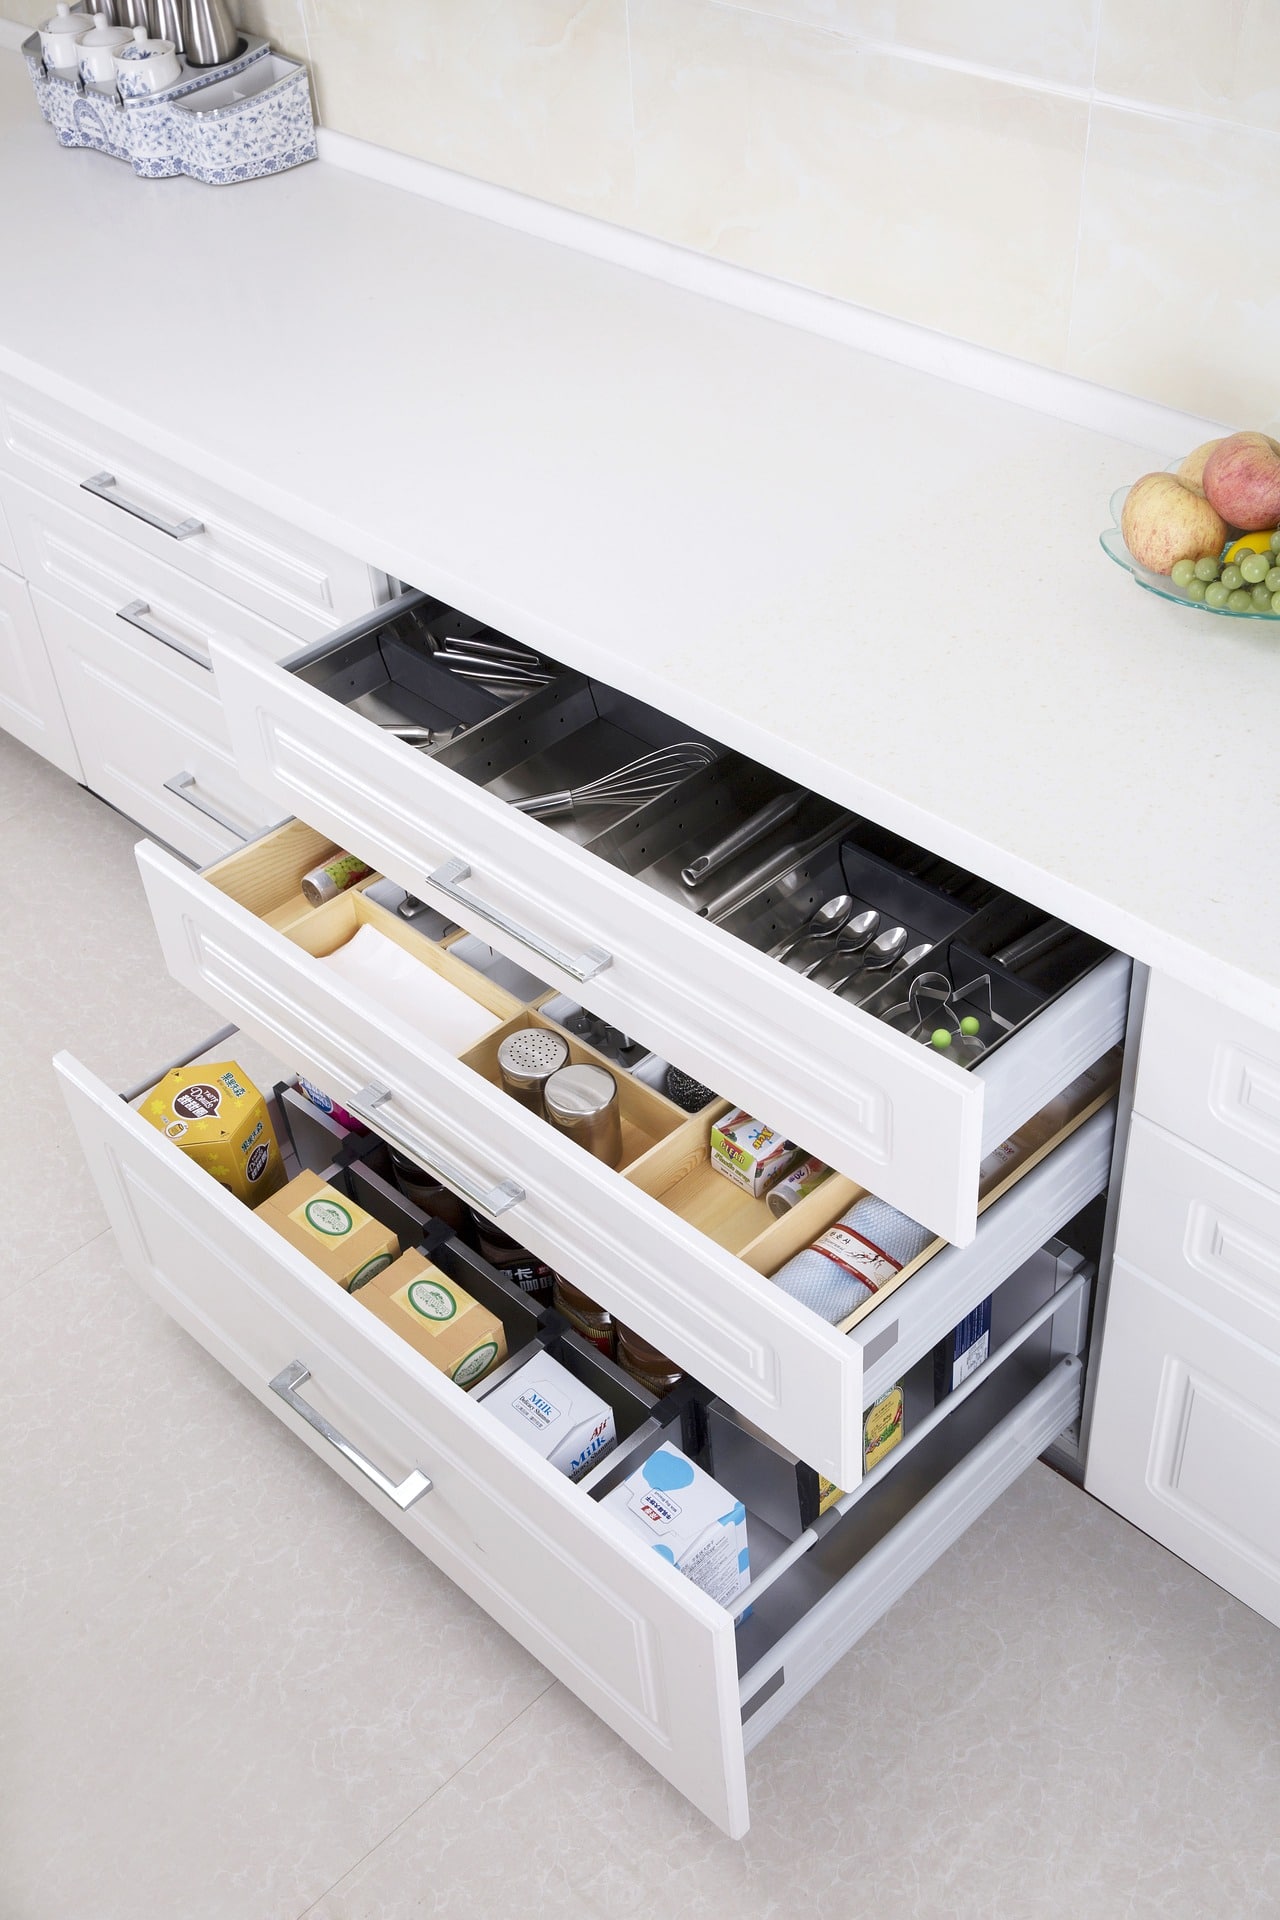 White Drawers filled with Kitchen Utensils.